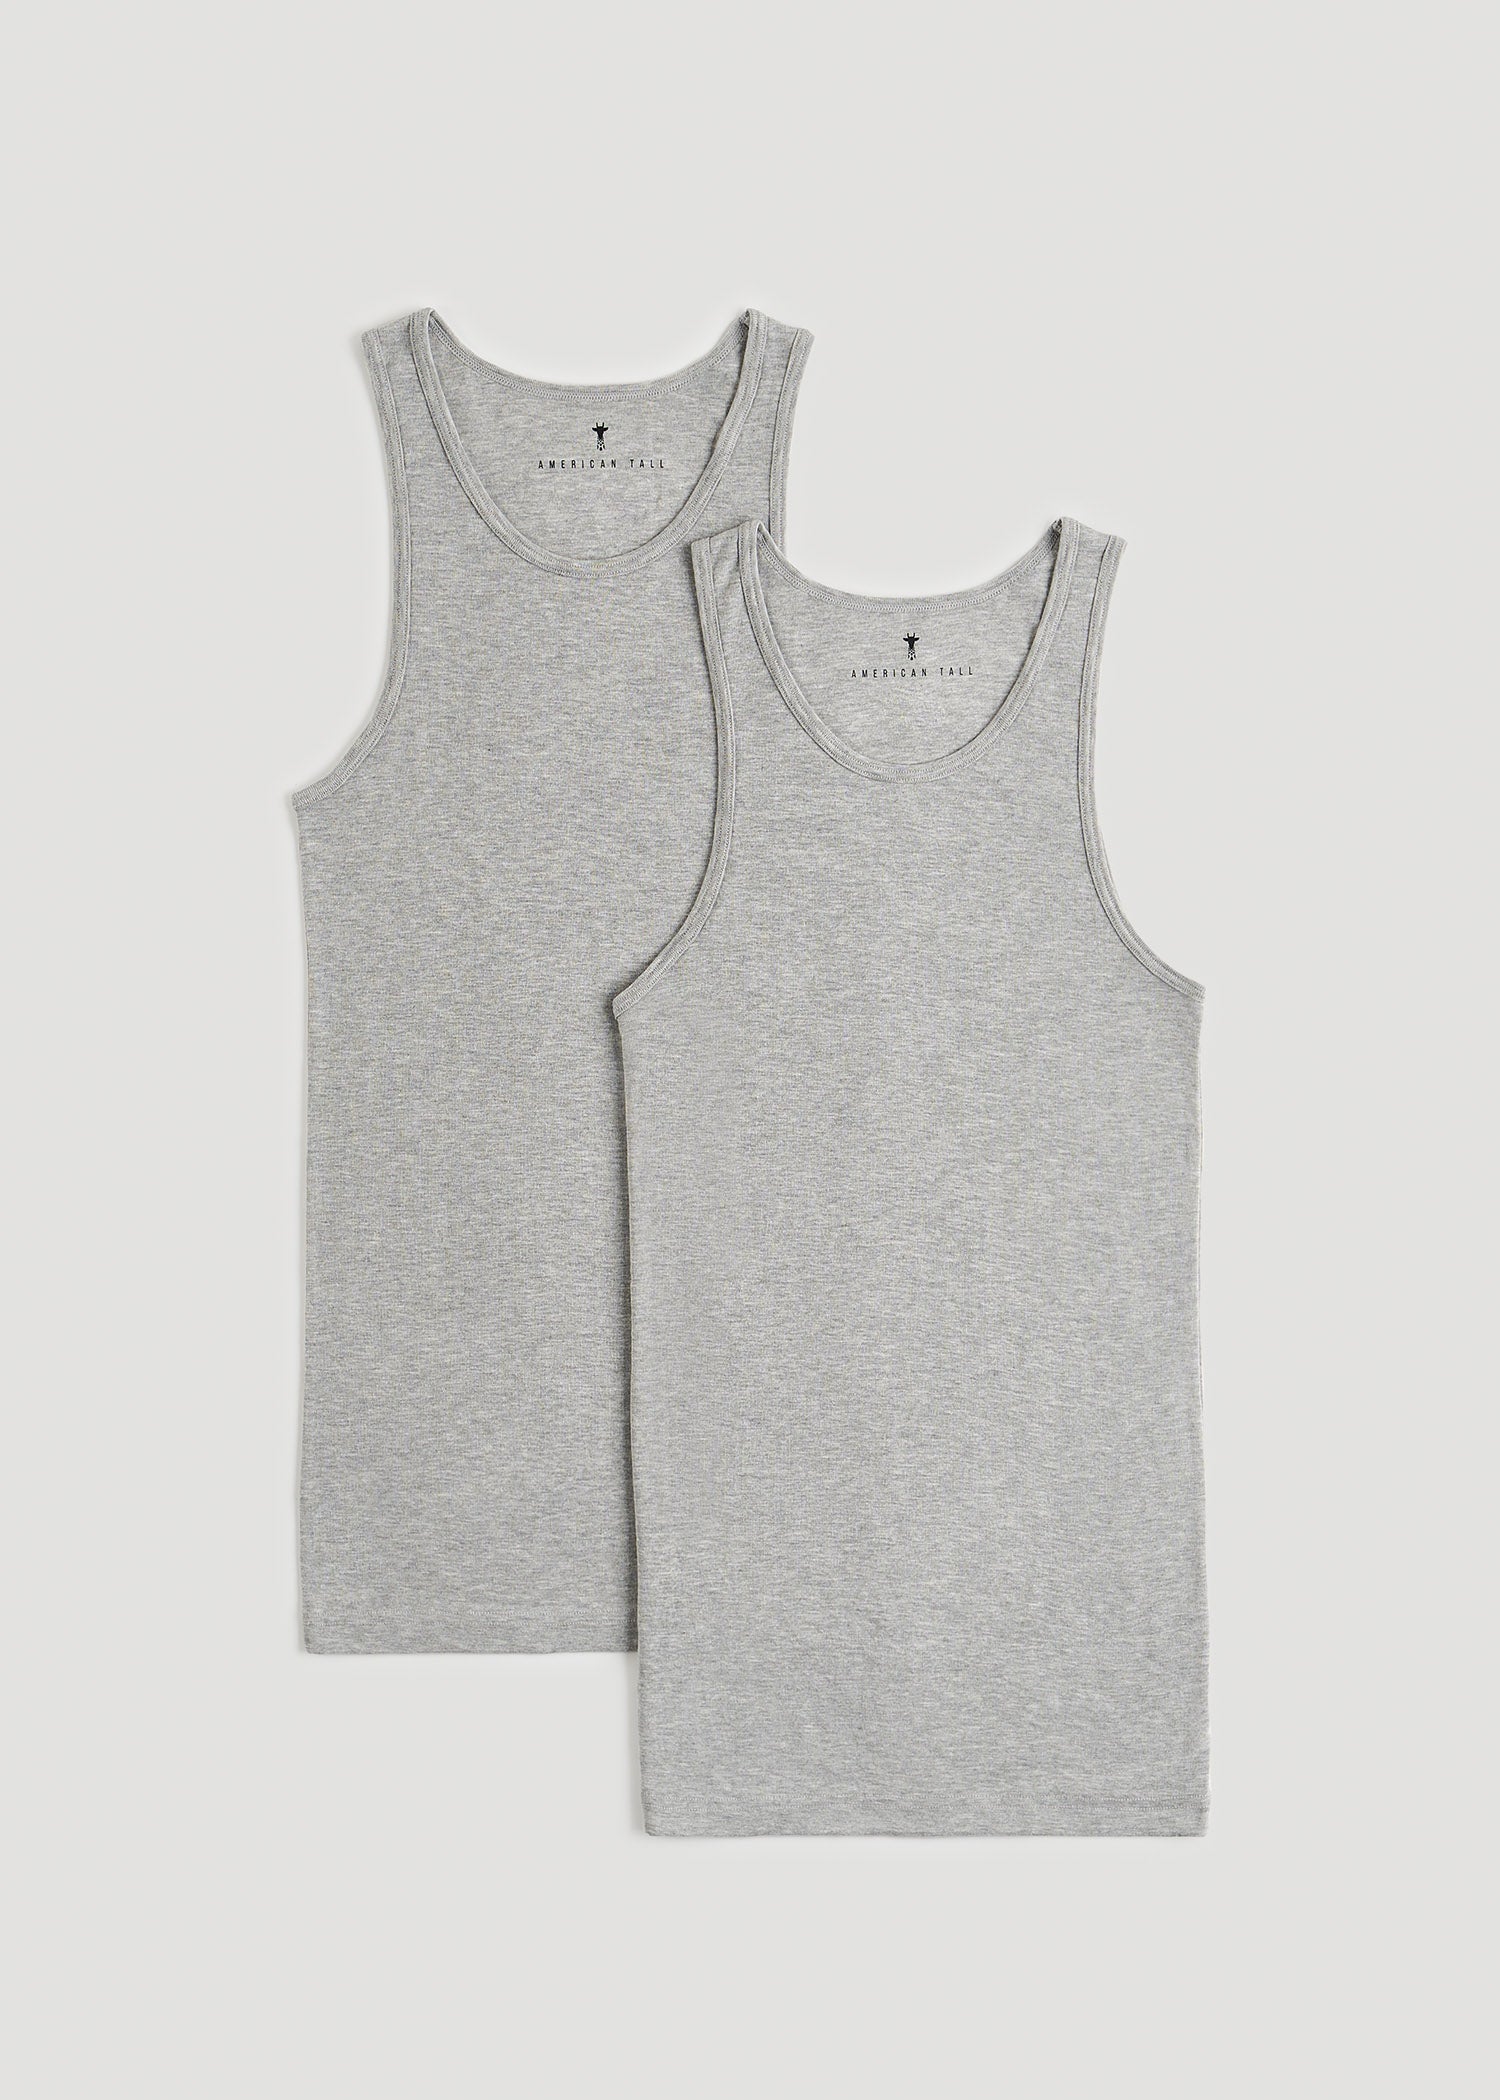 Men's Tall Ribbed Undershirt Tank Top in Bright White (2-Pack)